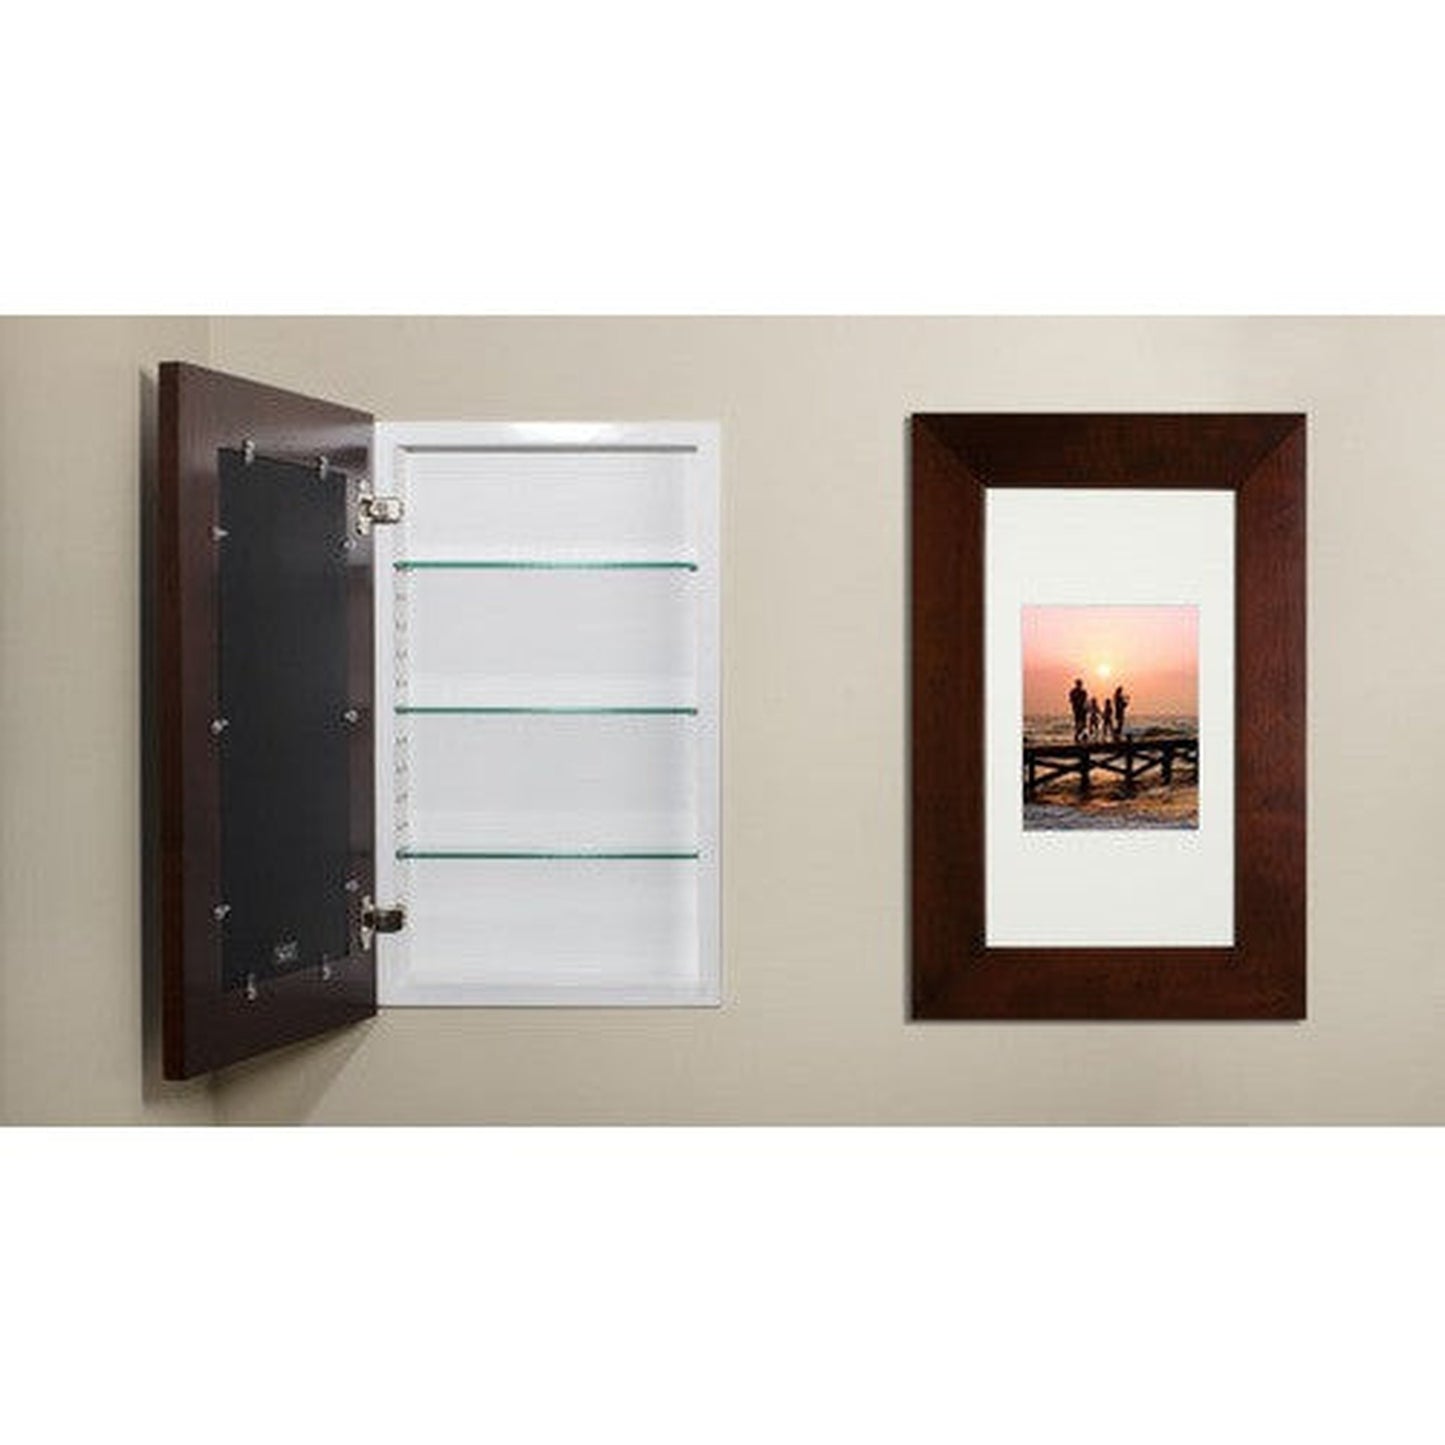 Fox Hollow Furnishings 14" x 24" Espresso Extra Large Standard 3.75" Depth White Interior Recessed Picture Frame Medicine Cabinet With Mirror and White Three Opening Matting